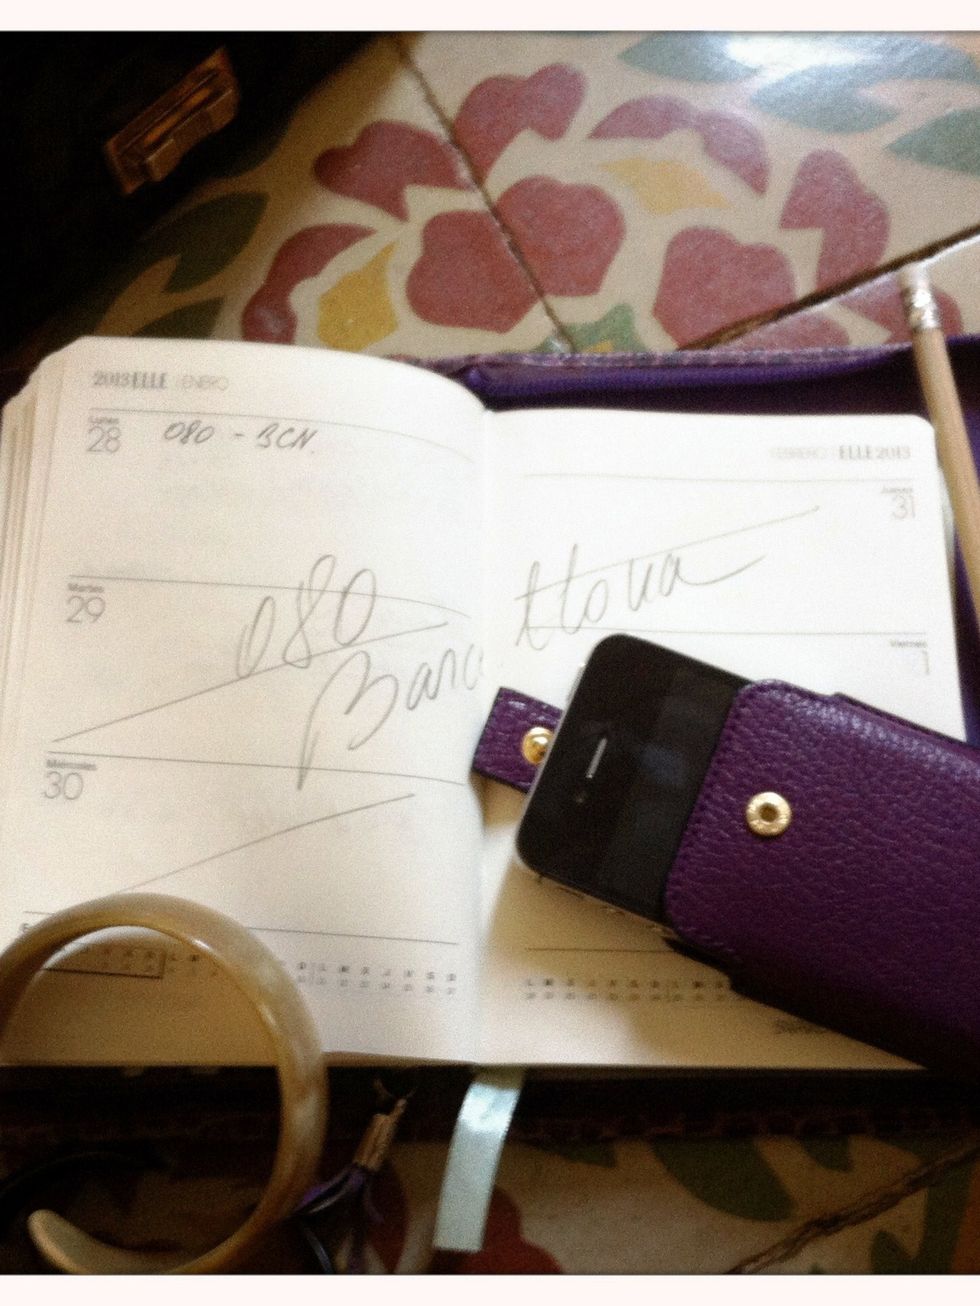 Purple, Stationery, Eye glass accessory, Violet, Material property, Everyday carry, Handwriting, Paper product, Notebook, Wallet, 